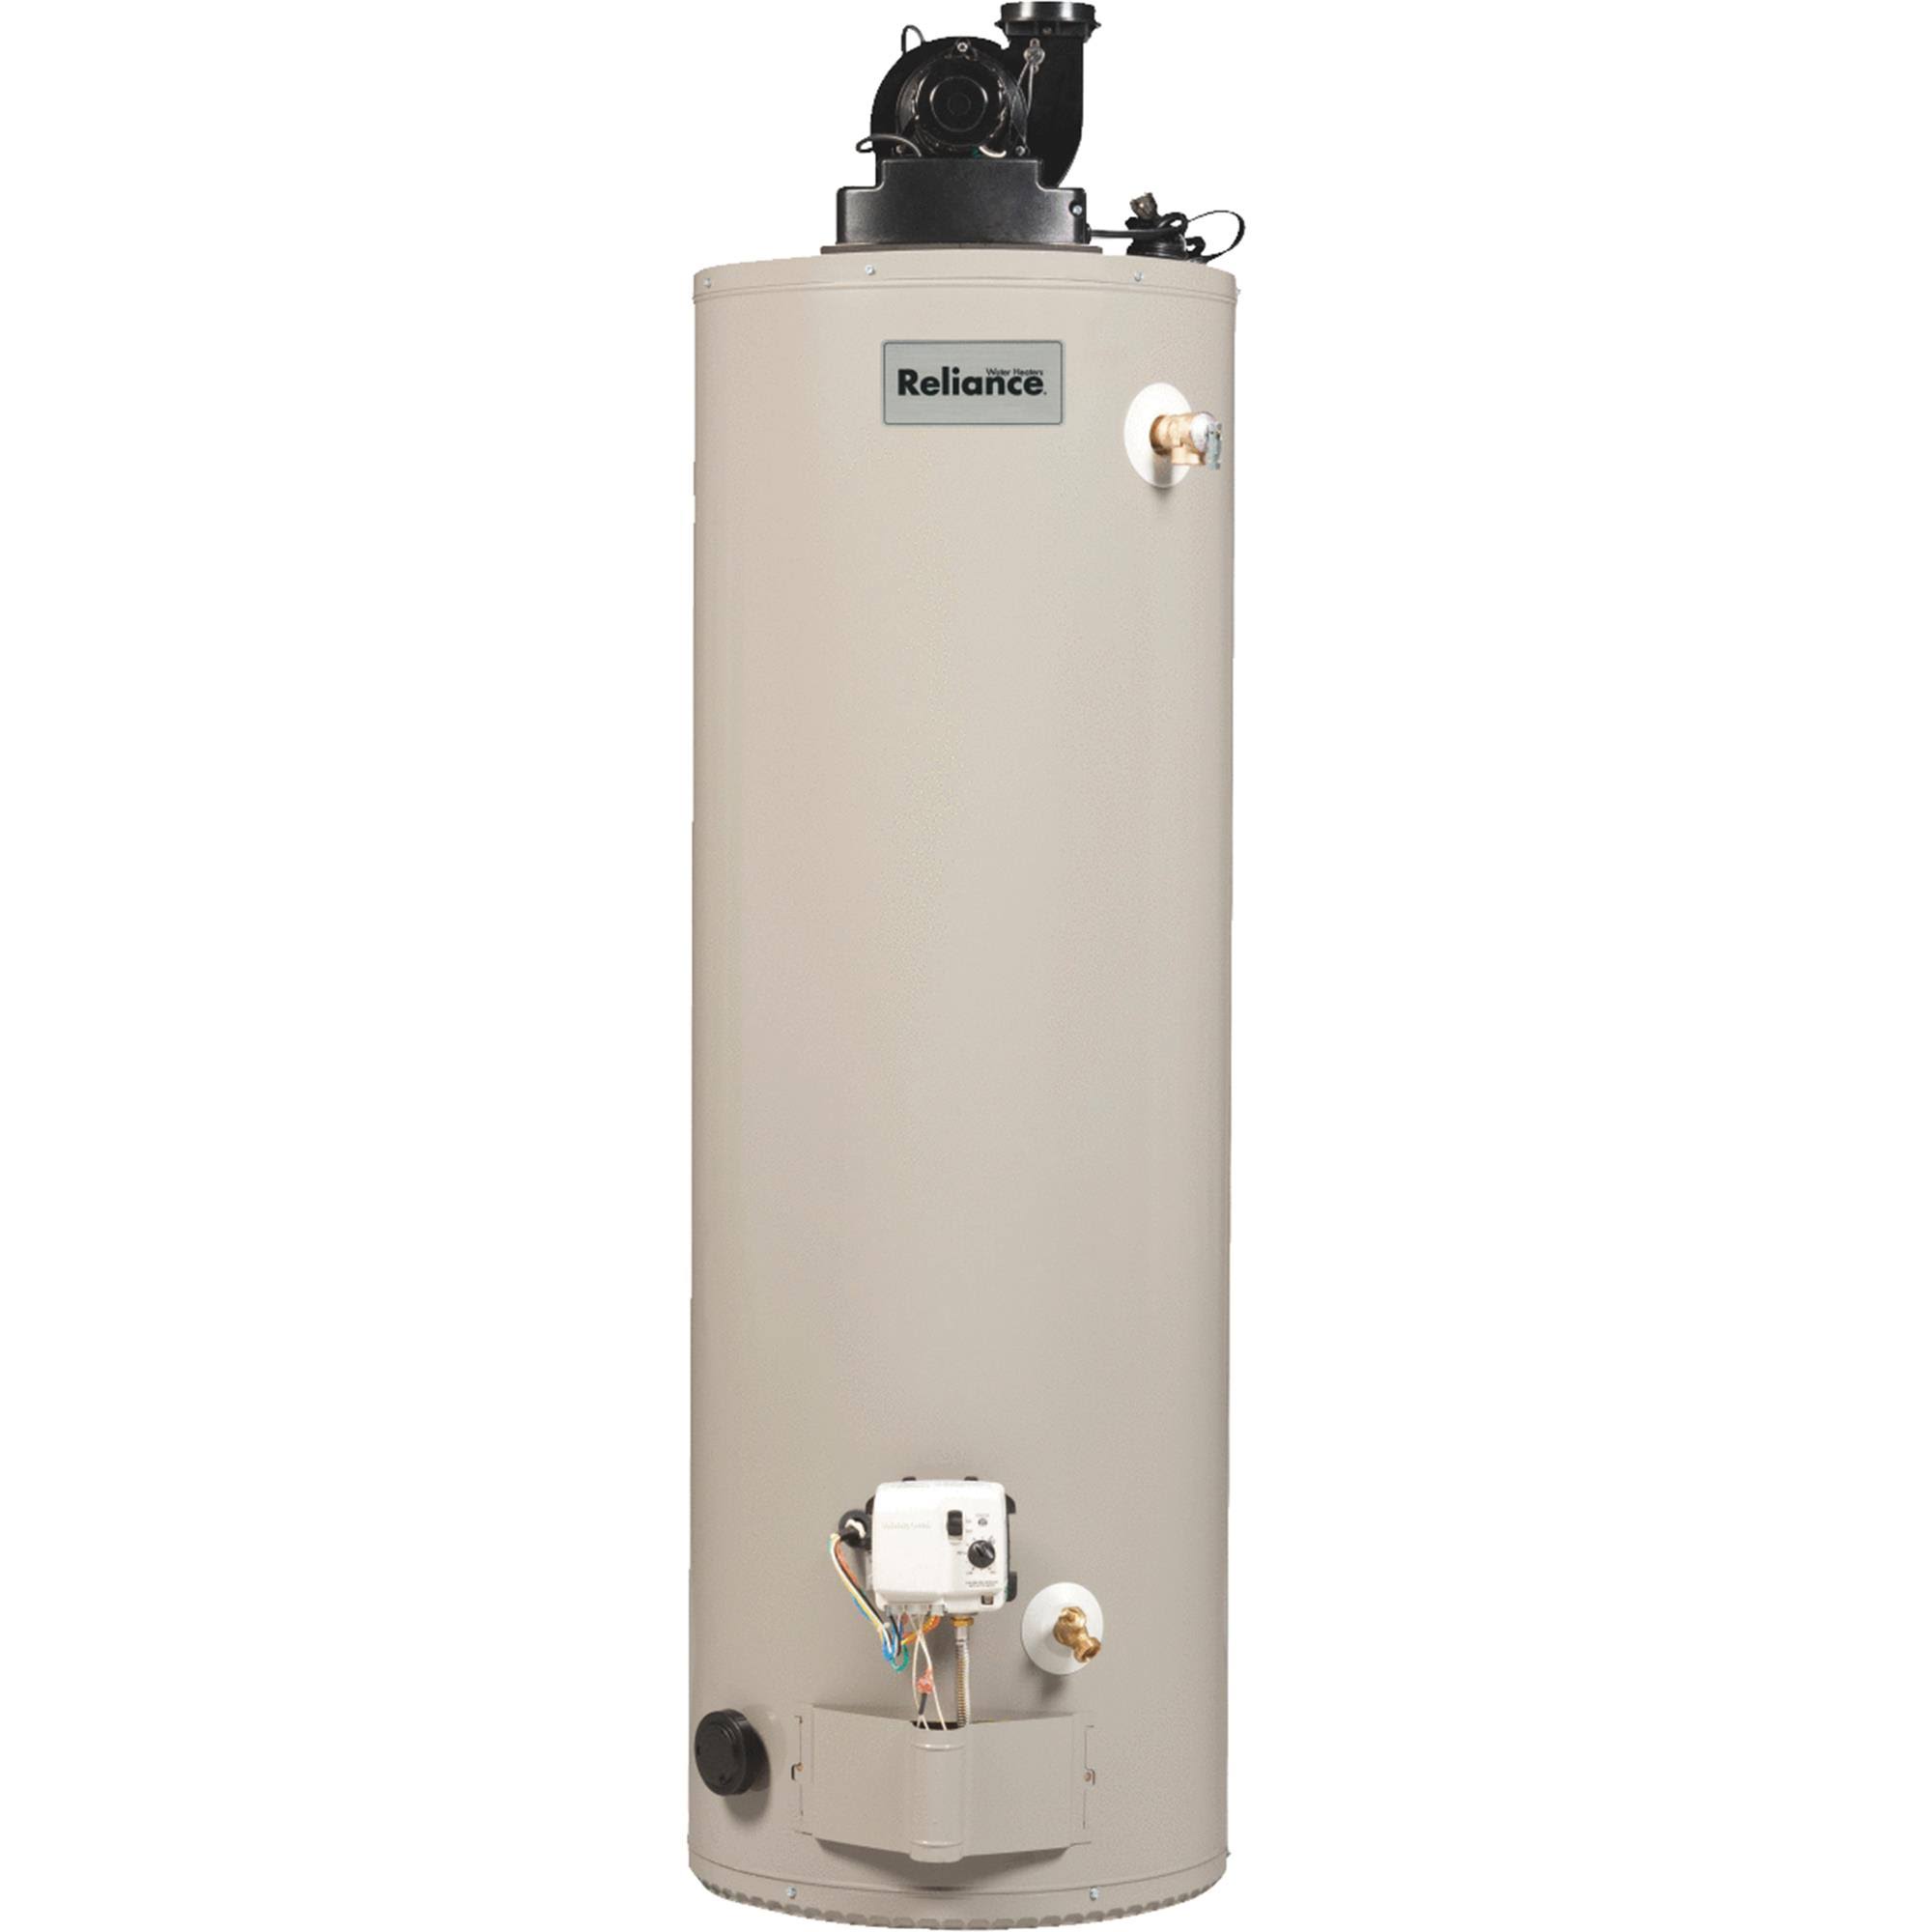 Reliance 50gal Liquid Propane (LP) Gas Water Heater with Power Vent